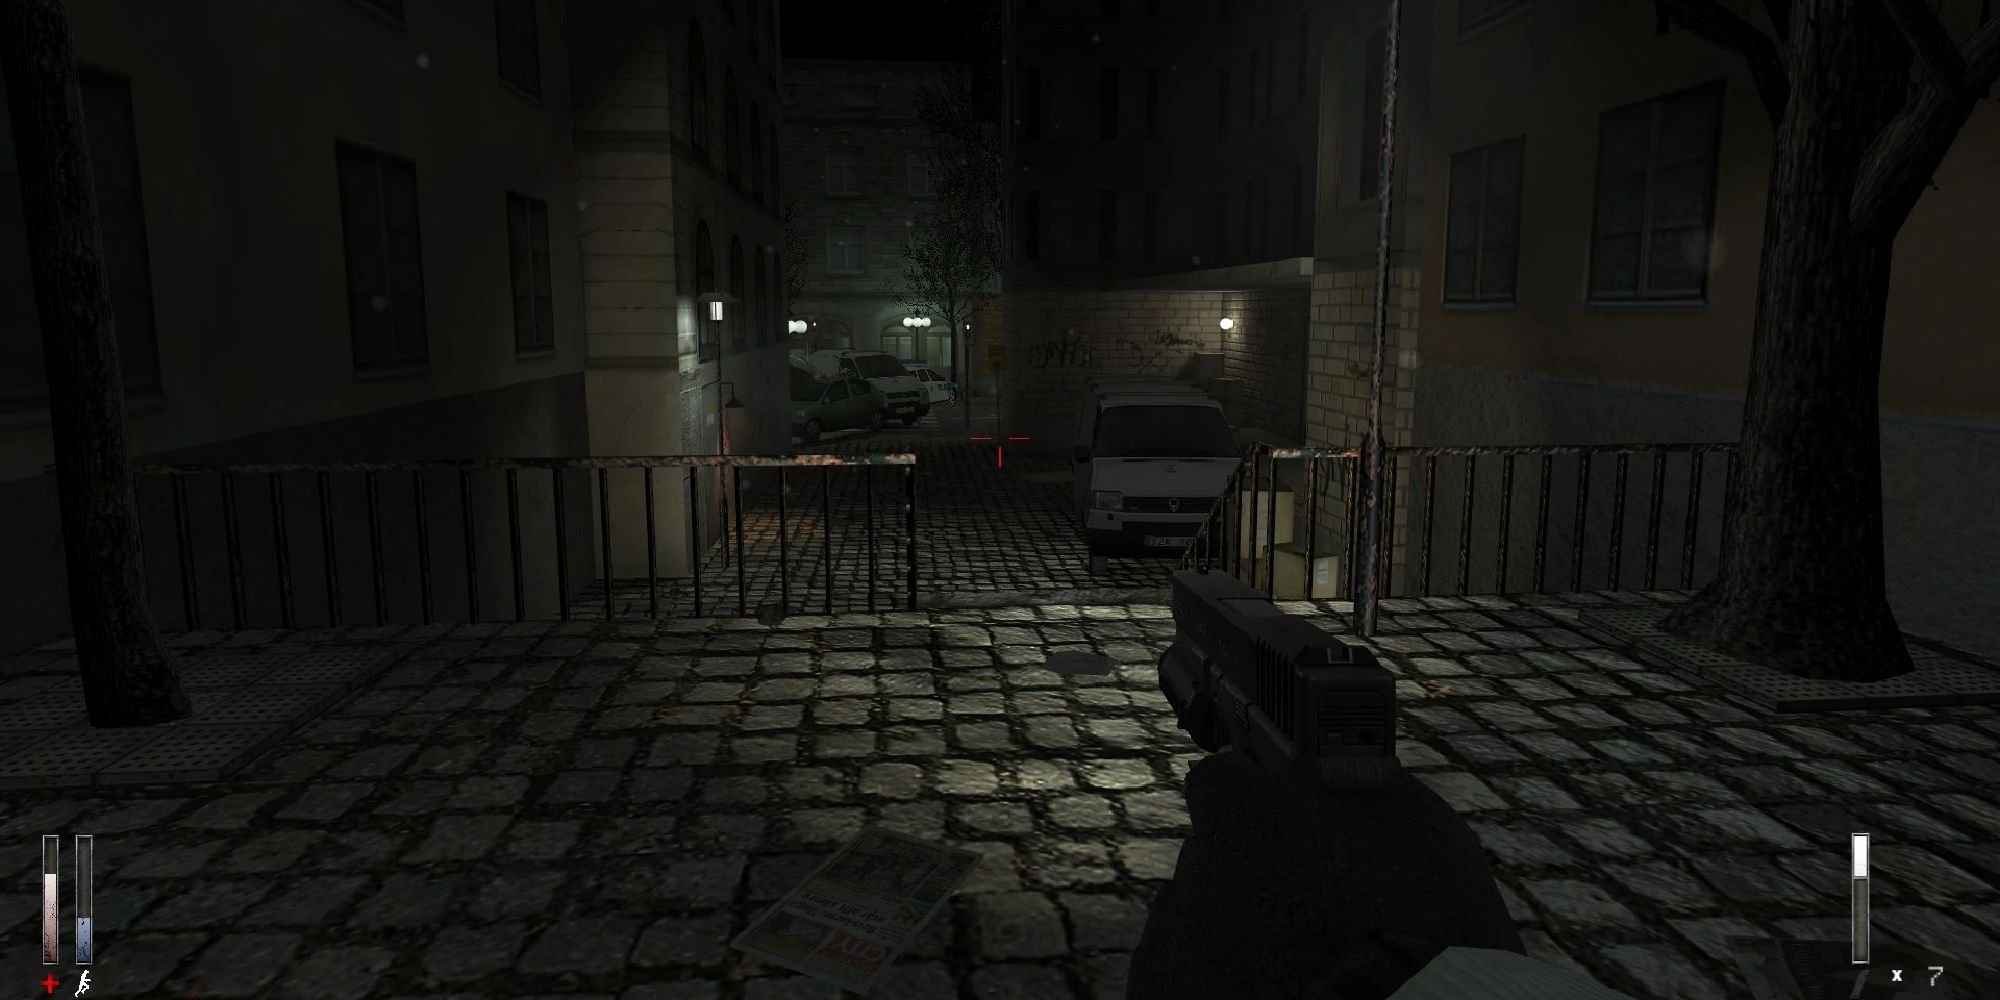 A screenshot showing a game character moving through a deserted city.